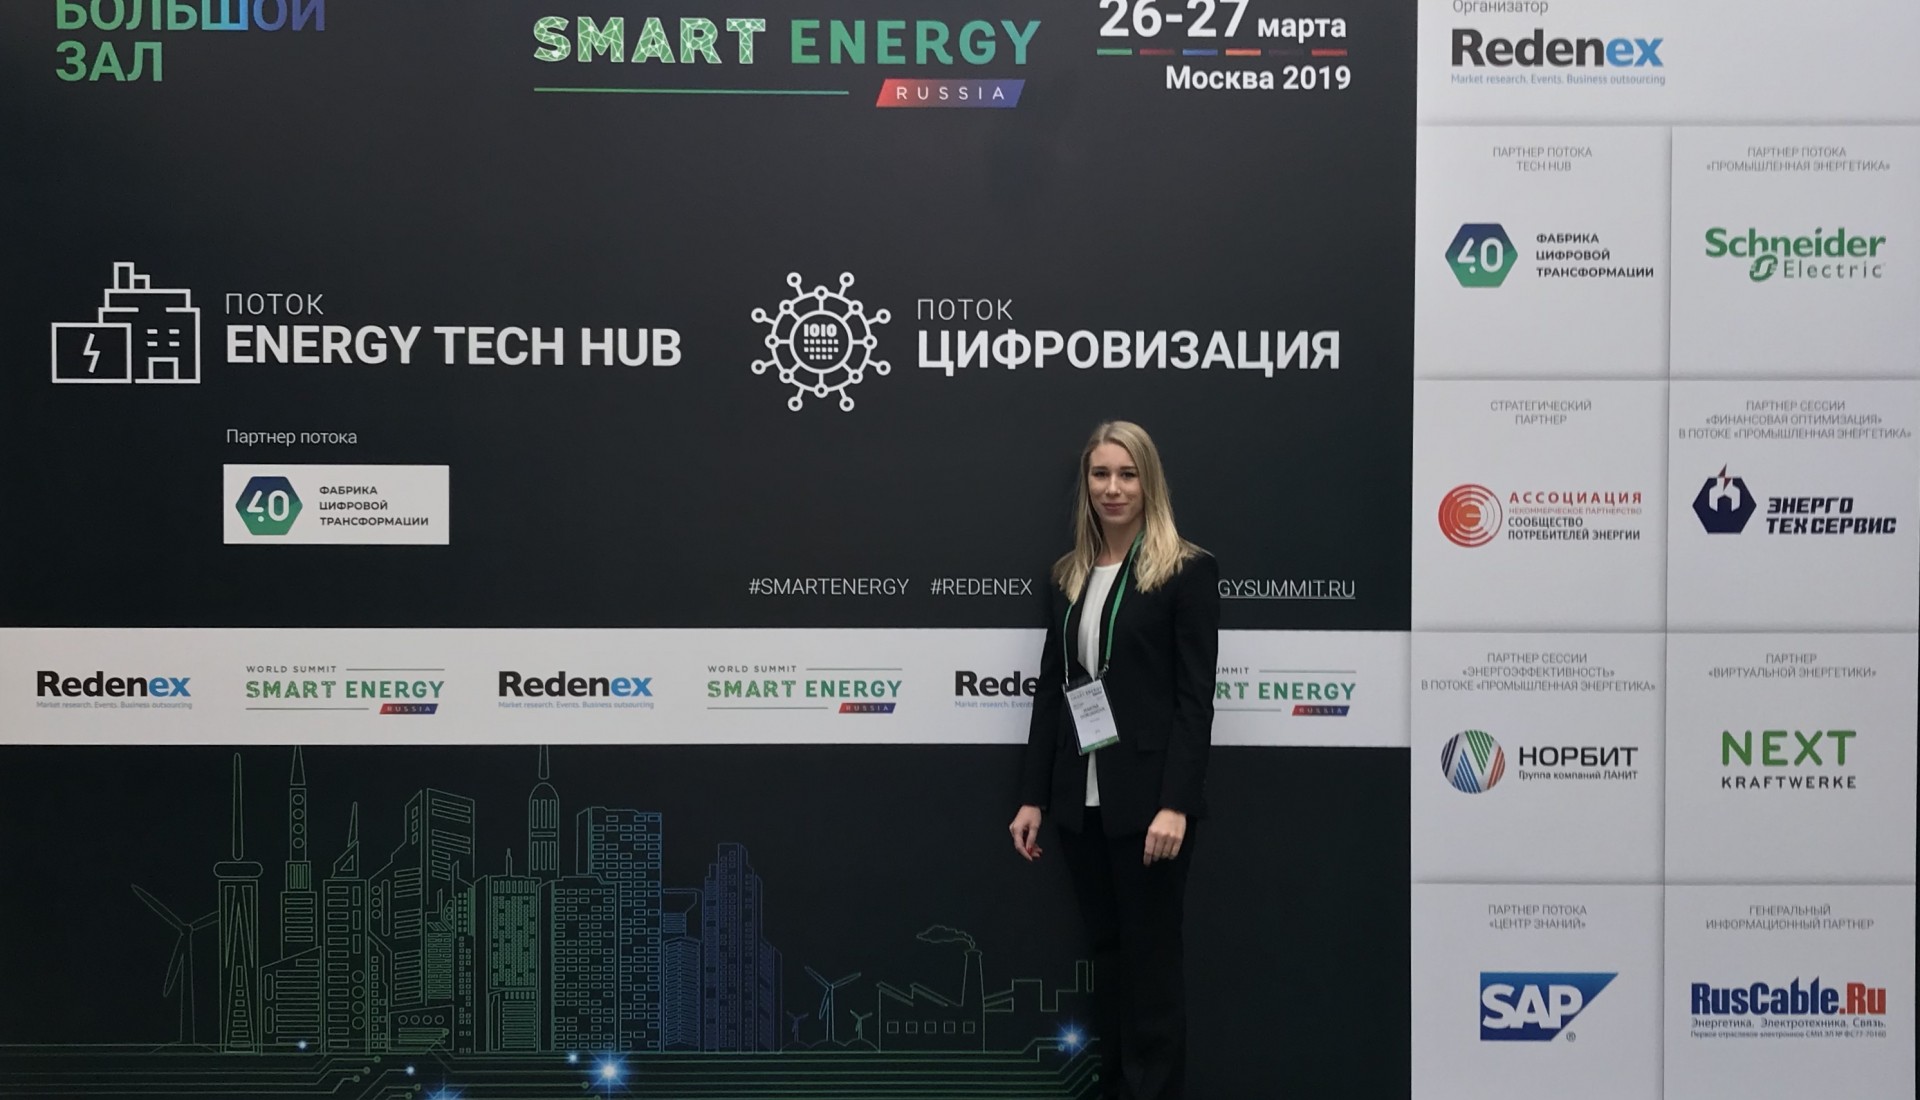 the-feedback-project-participated-in-the-iii-world-smart-energy-summit